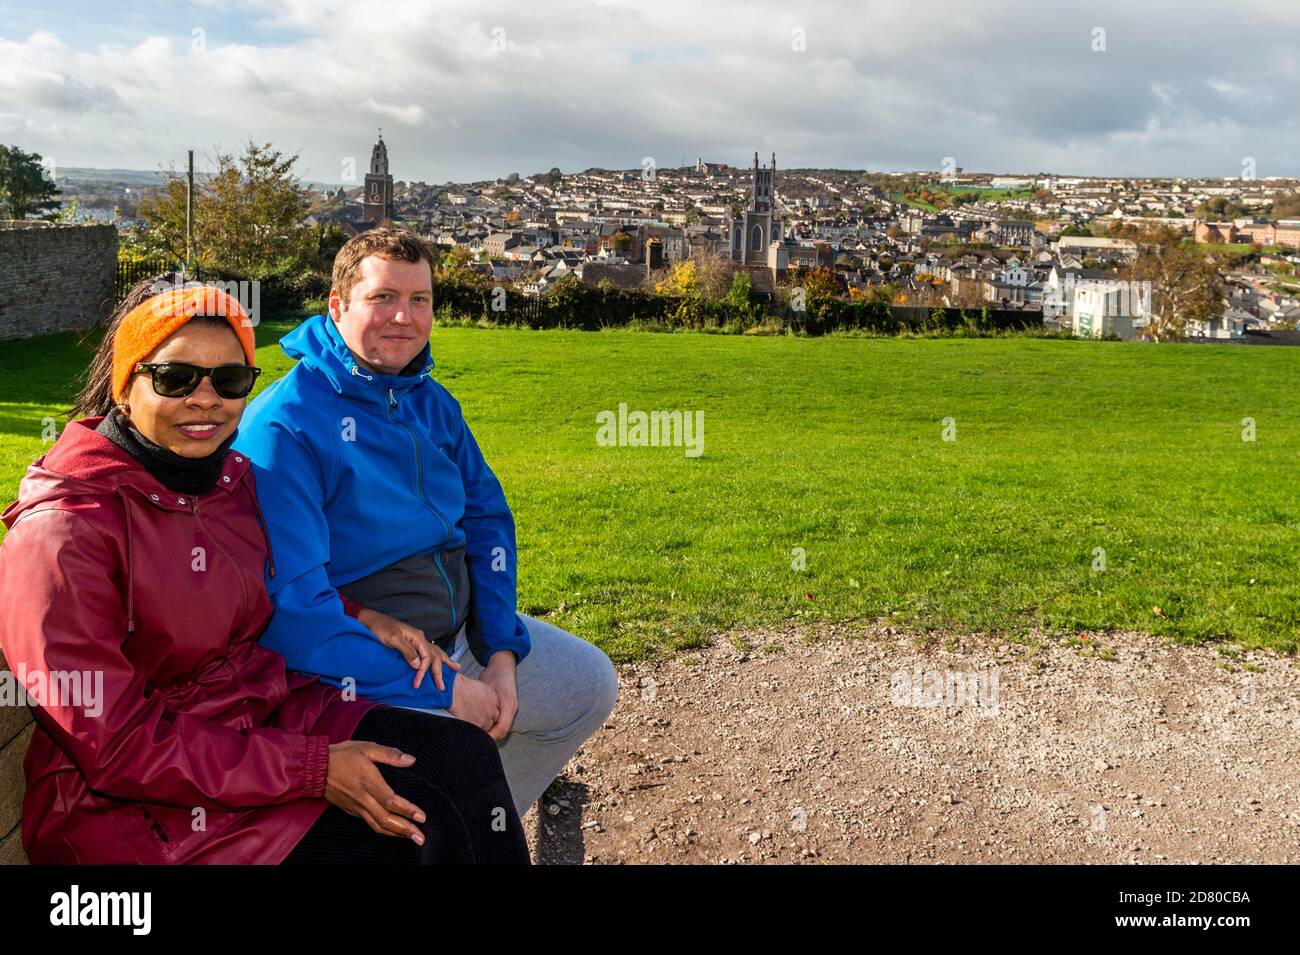 Cork, Ireland. 26th Oct, 2020. Many people took advantage of the good Bank Holiday weather in Cork today. Bell's Field overlooking Cork was very popular. Enjoying the view and good weather were Luana Cruz and Rafel Pietrzyk from Cork. Credit: AG News/Alamy Live News Stock Photo